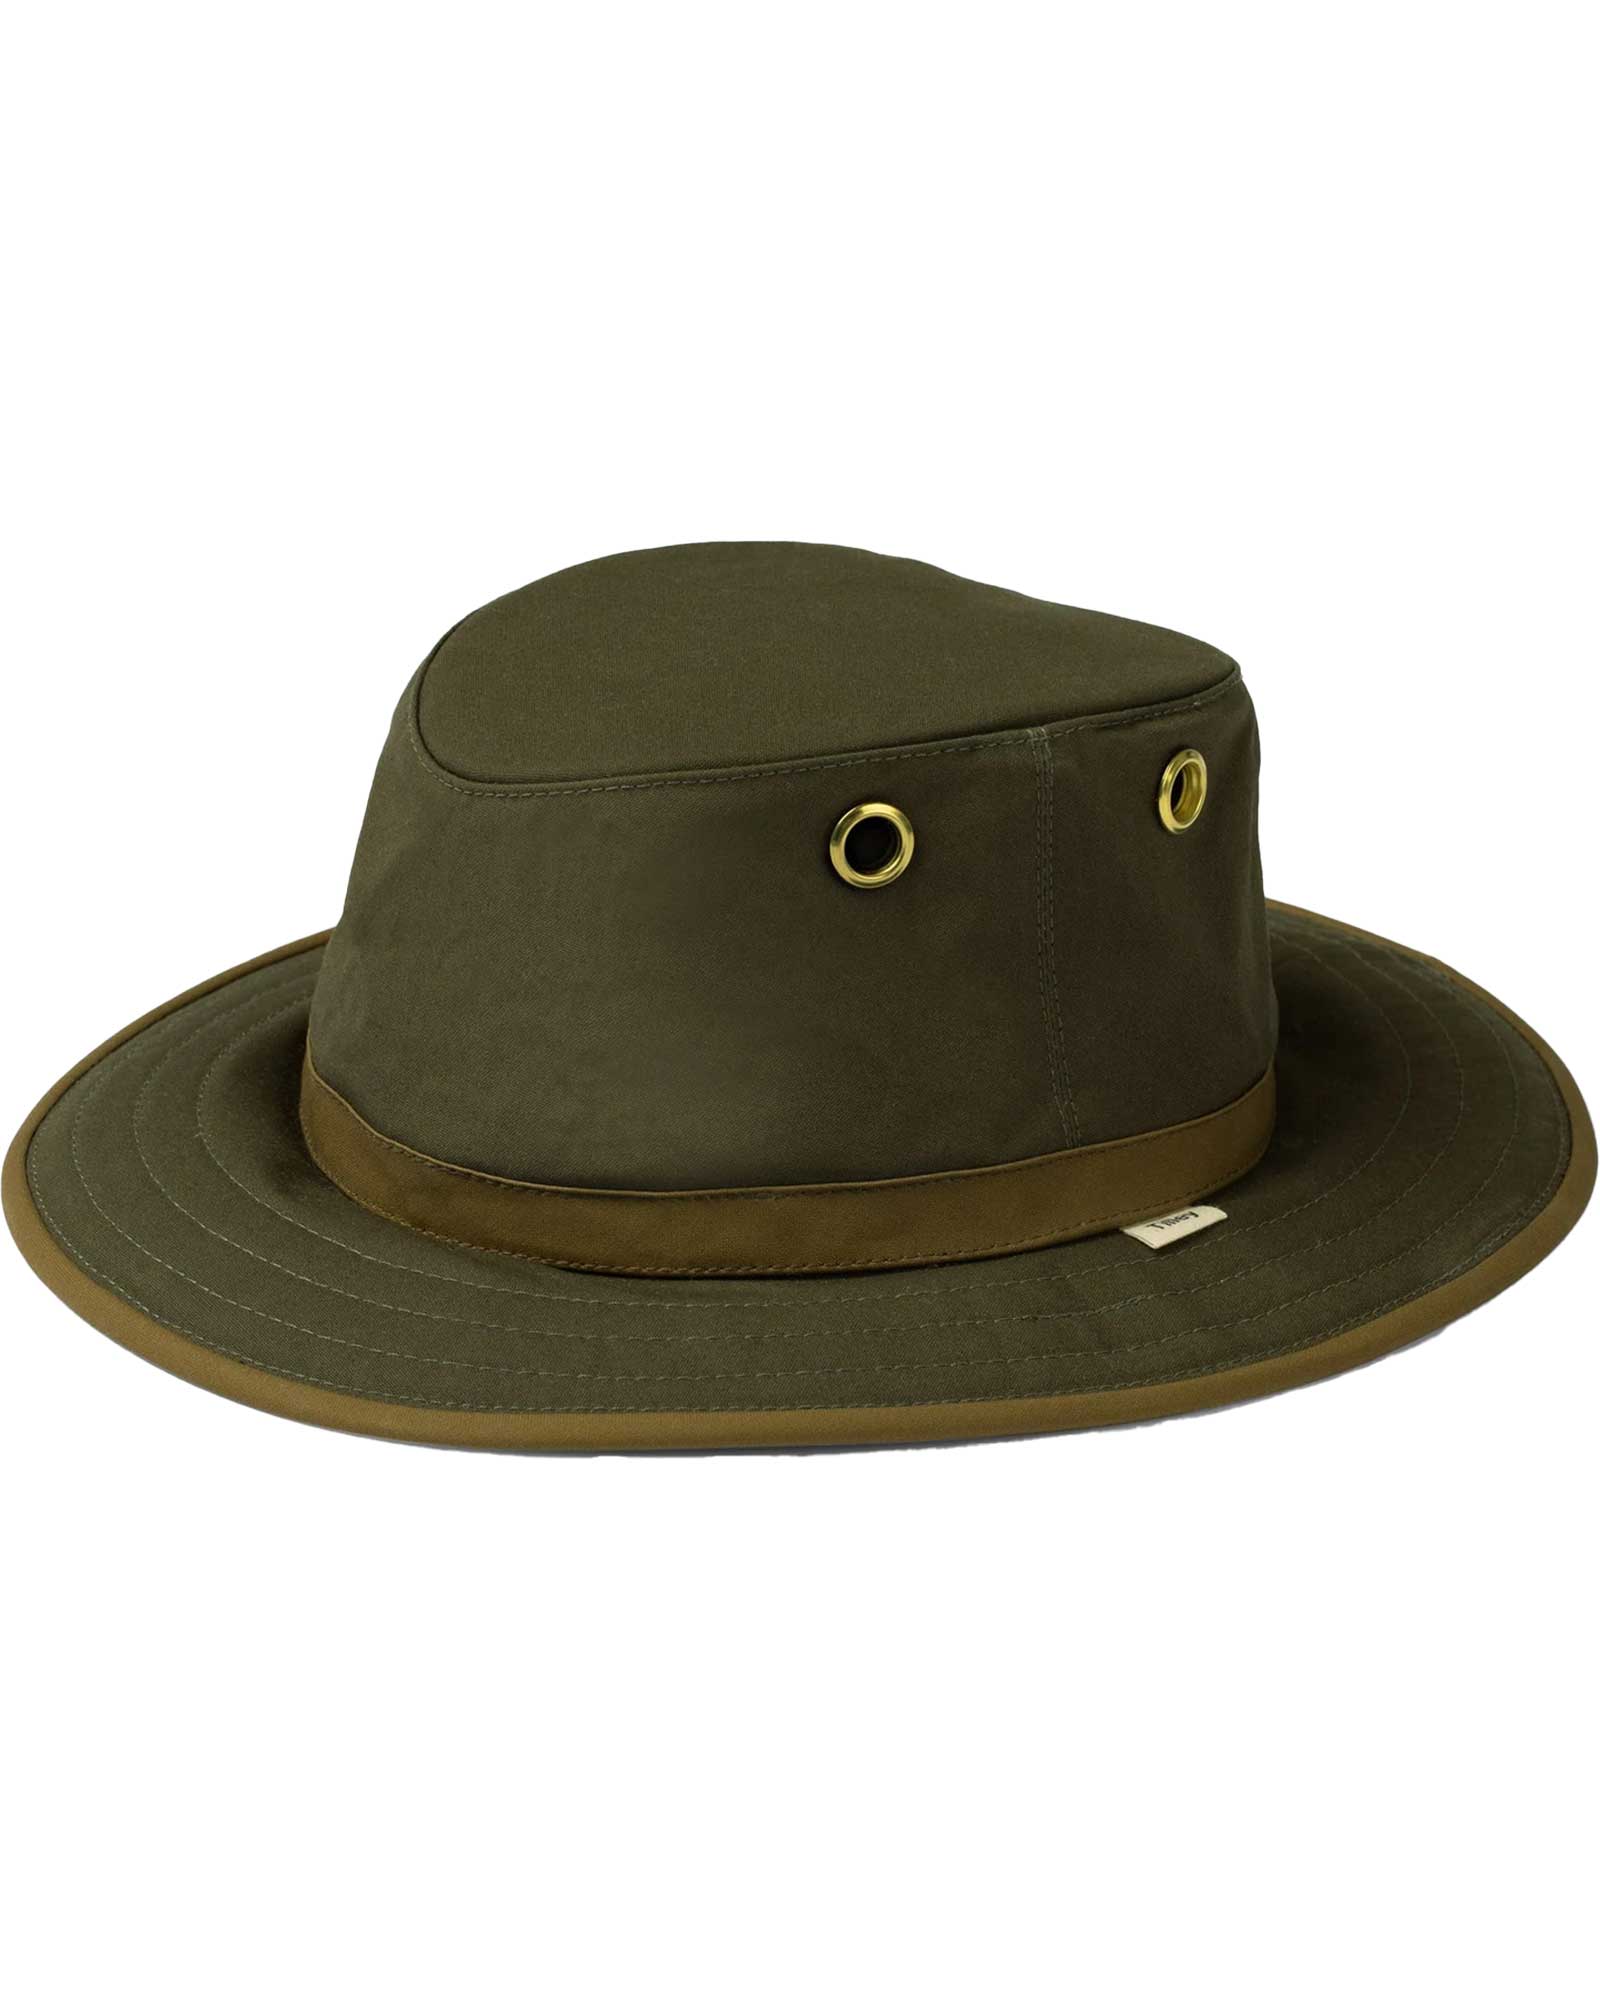 Tilley Outback Waxed Cotton Hat - Green 7 1/4